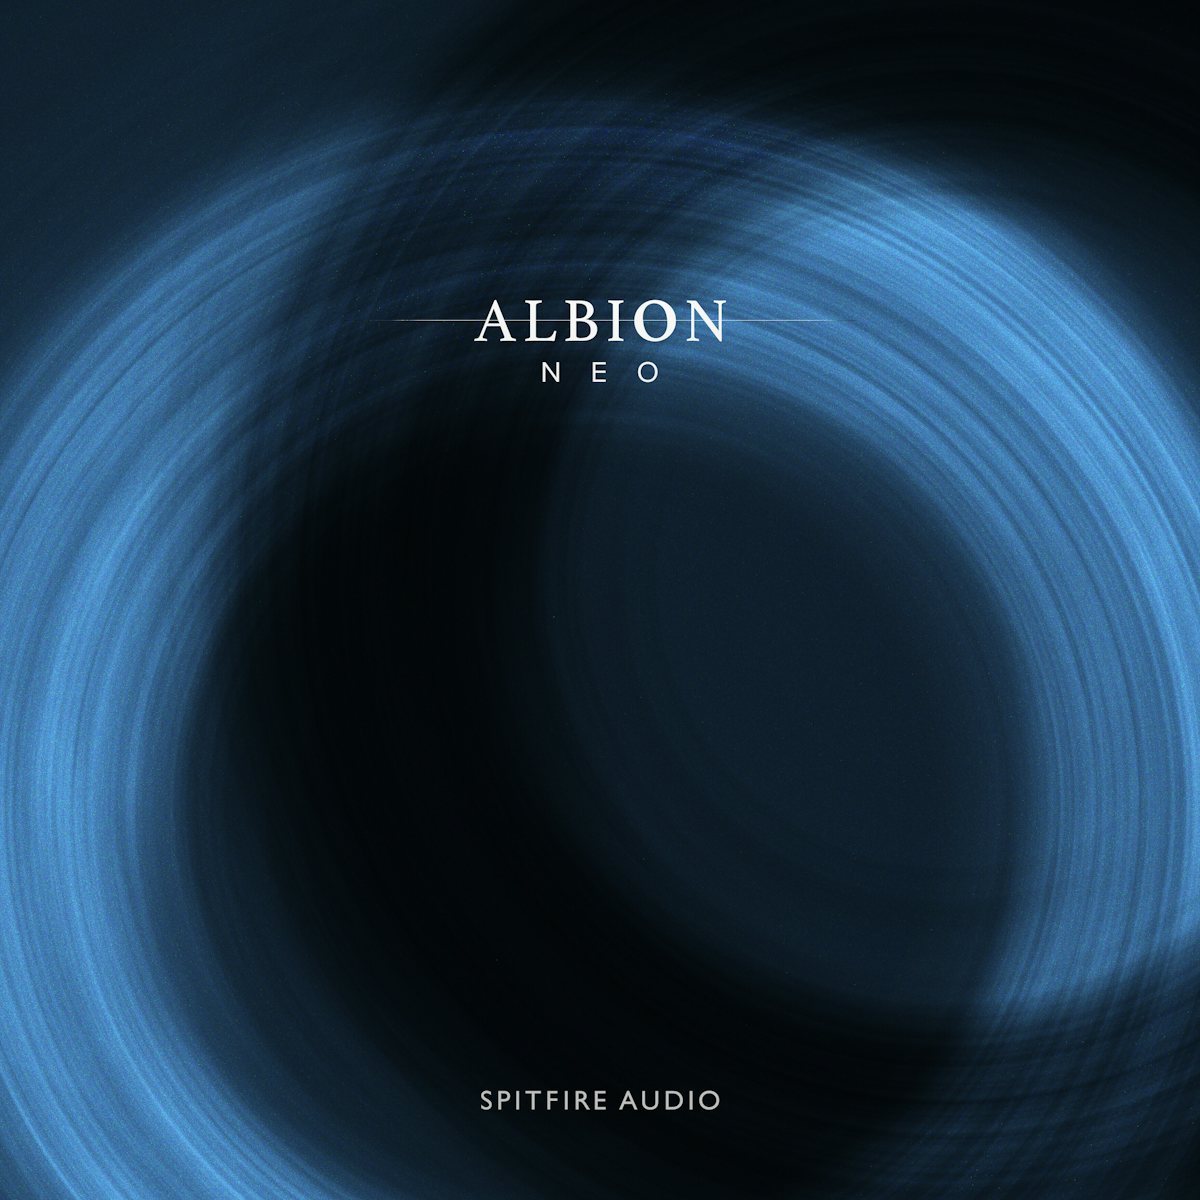 Albion Neo product artwork